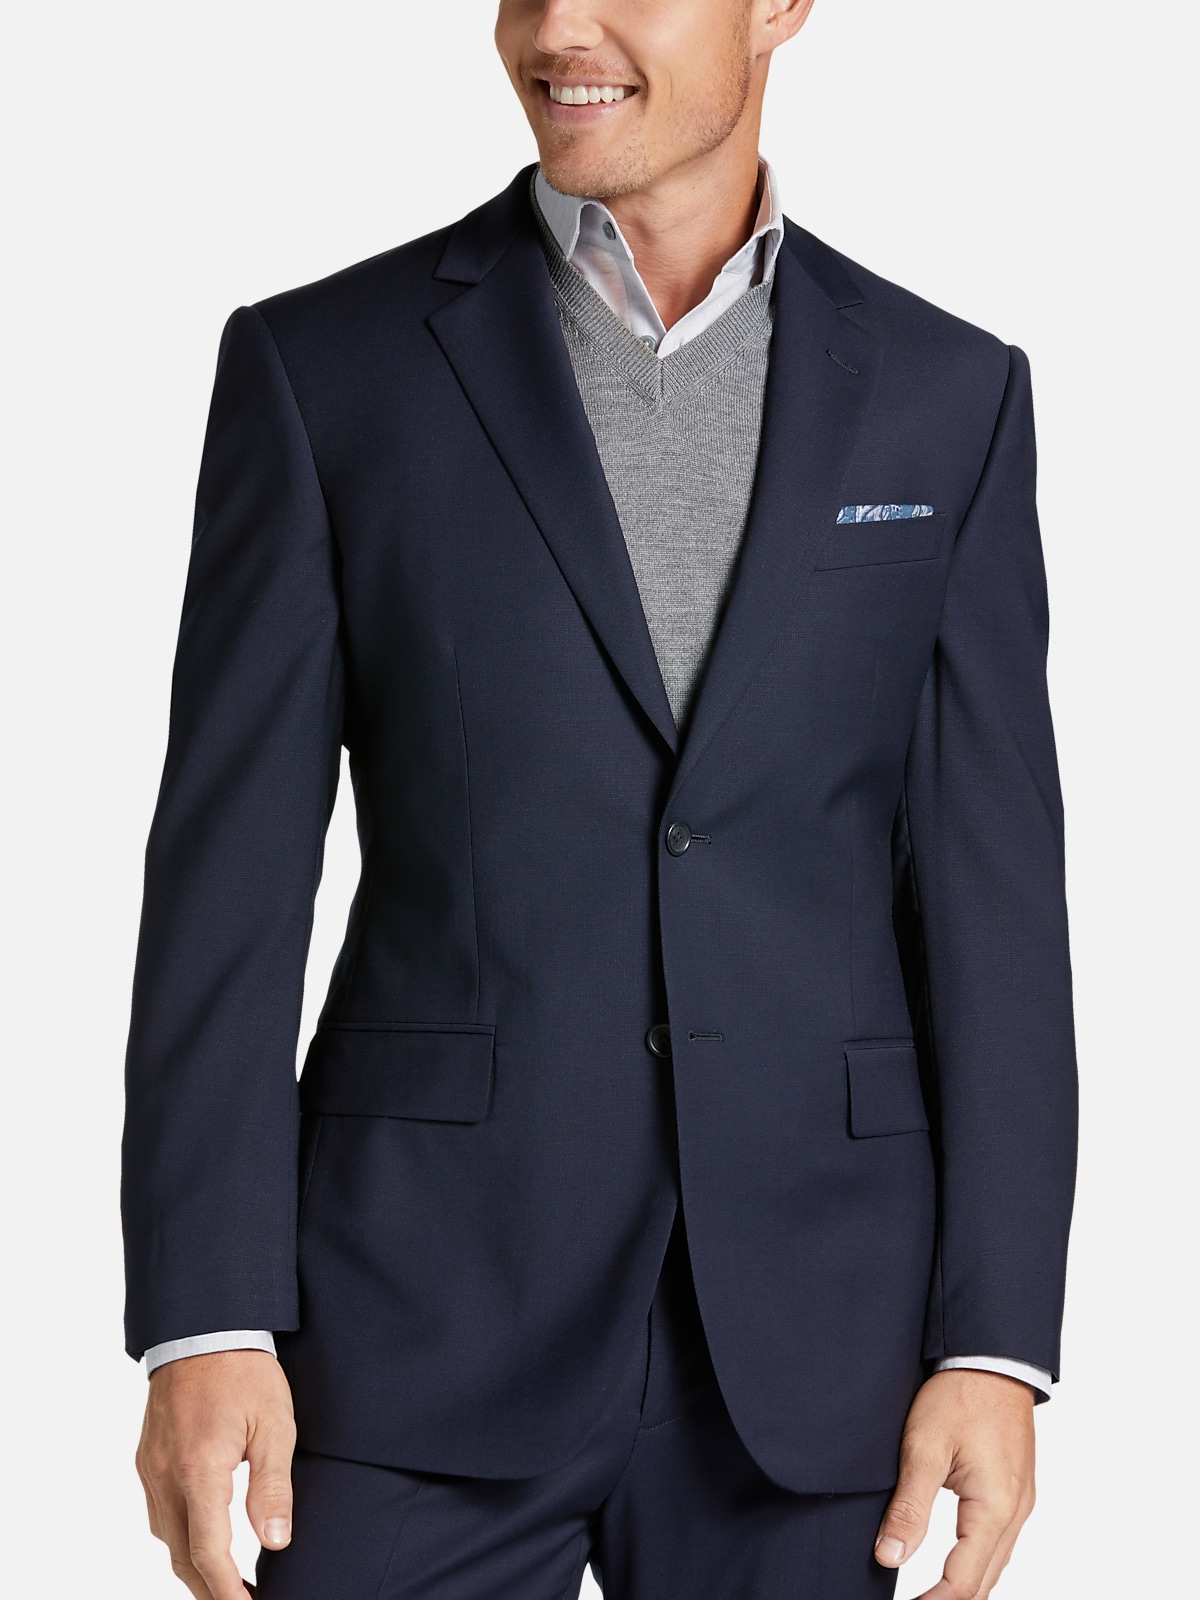 Pronto Uomo Platinum Modern Fit Suit | All Clothing| Men's Wearhouse